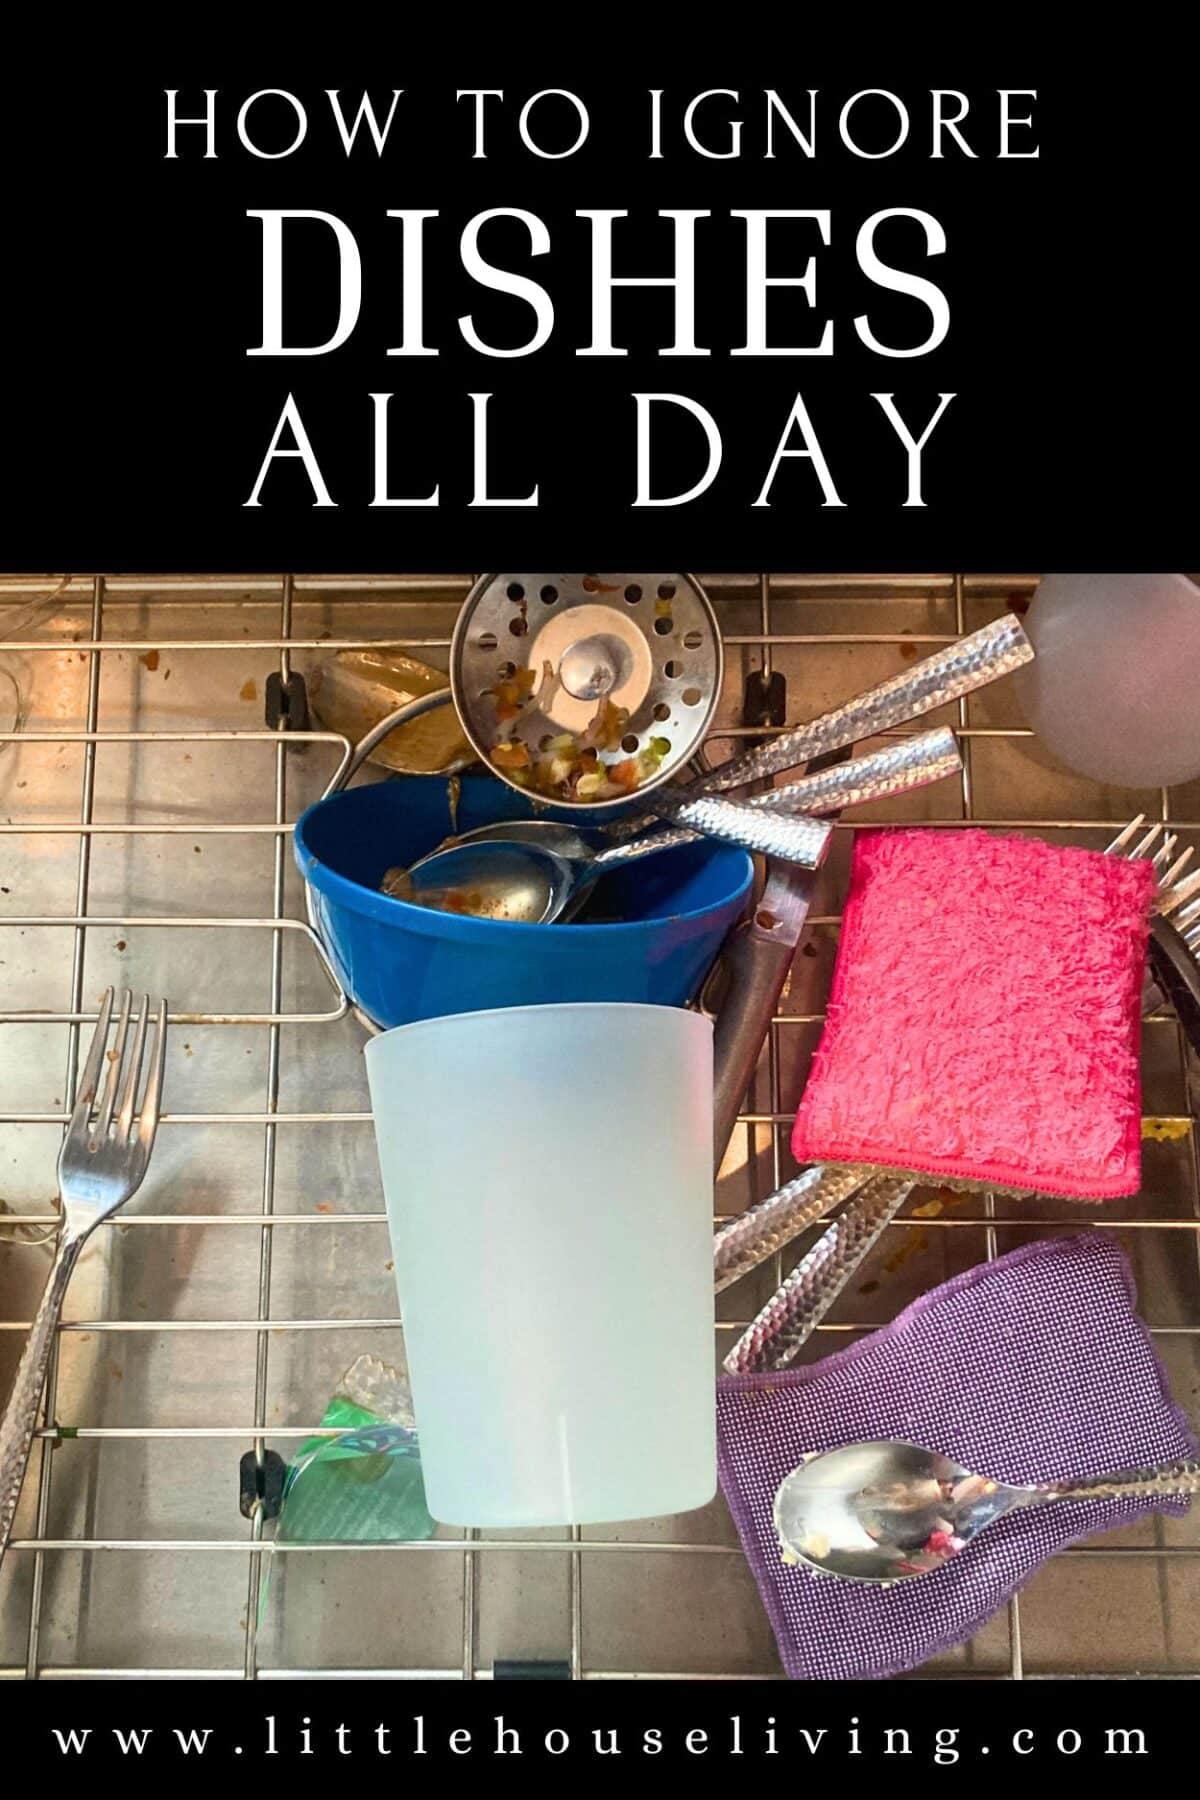 How to Ignore Dishes in Your Sink All Day